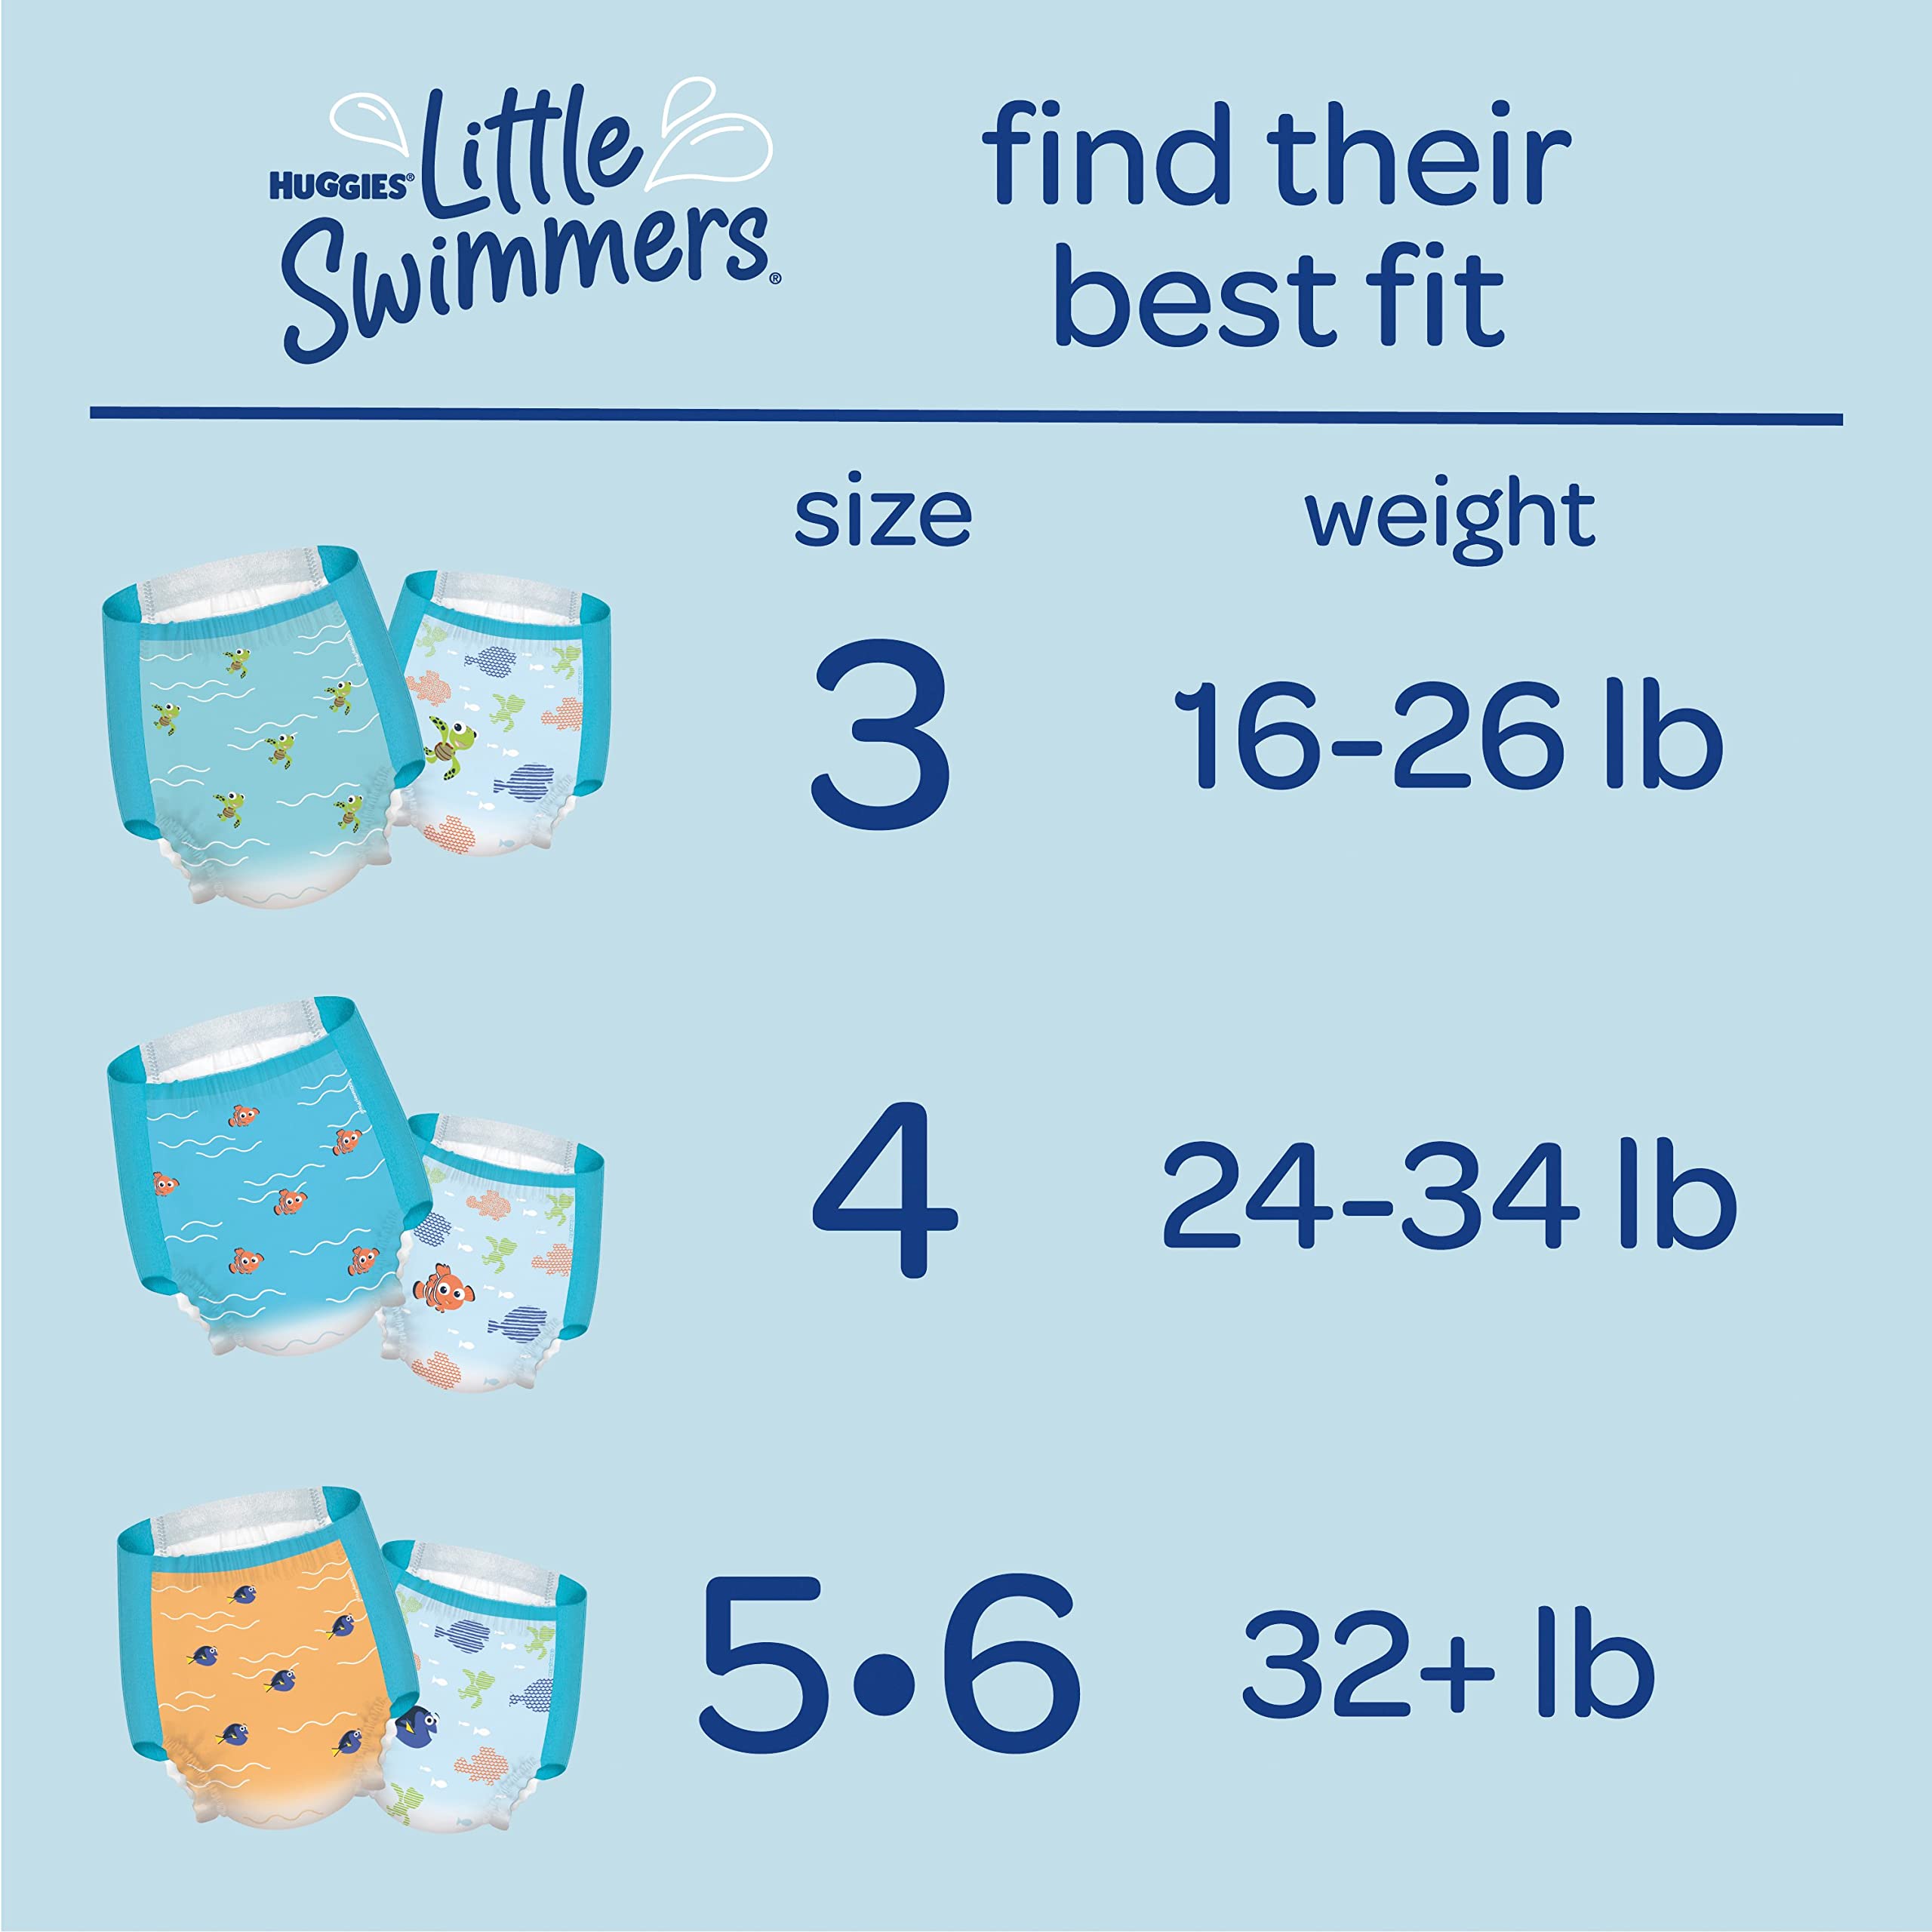 Huggies Little Swimmers Disposable Swim Diapers, Size 3 (16-26 lbs), 20 Ct